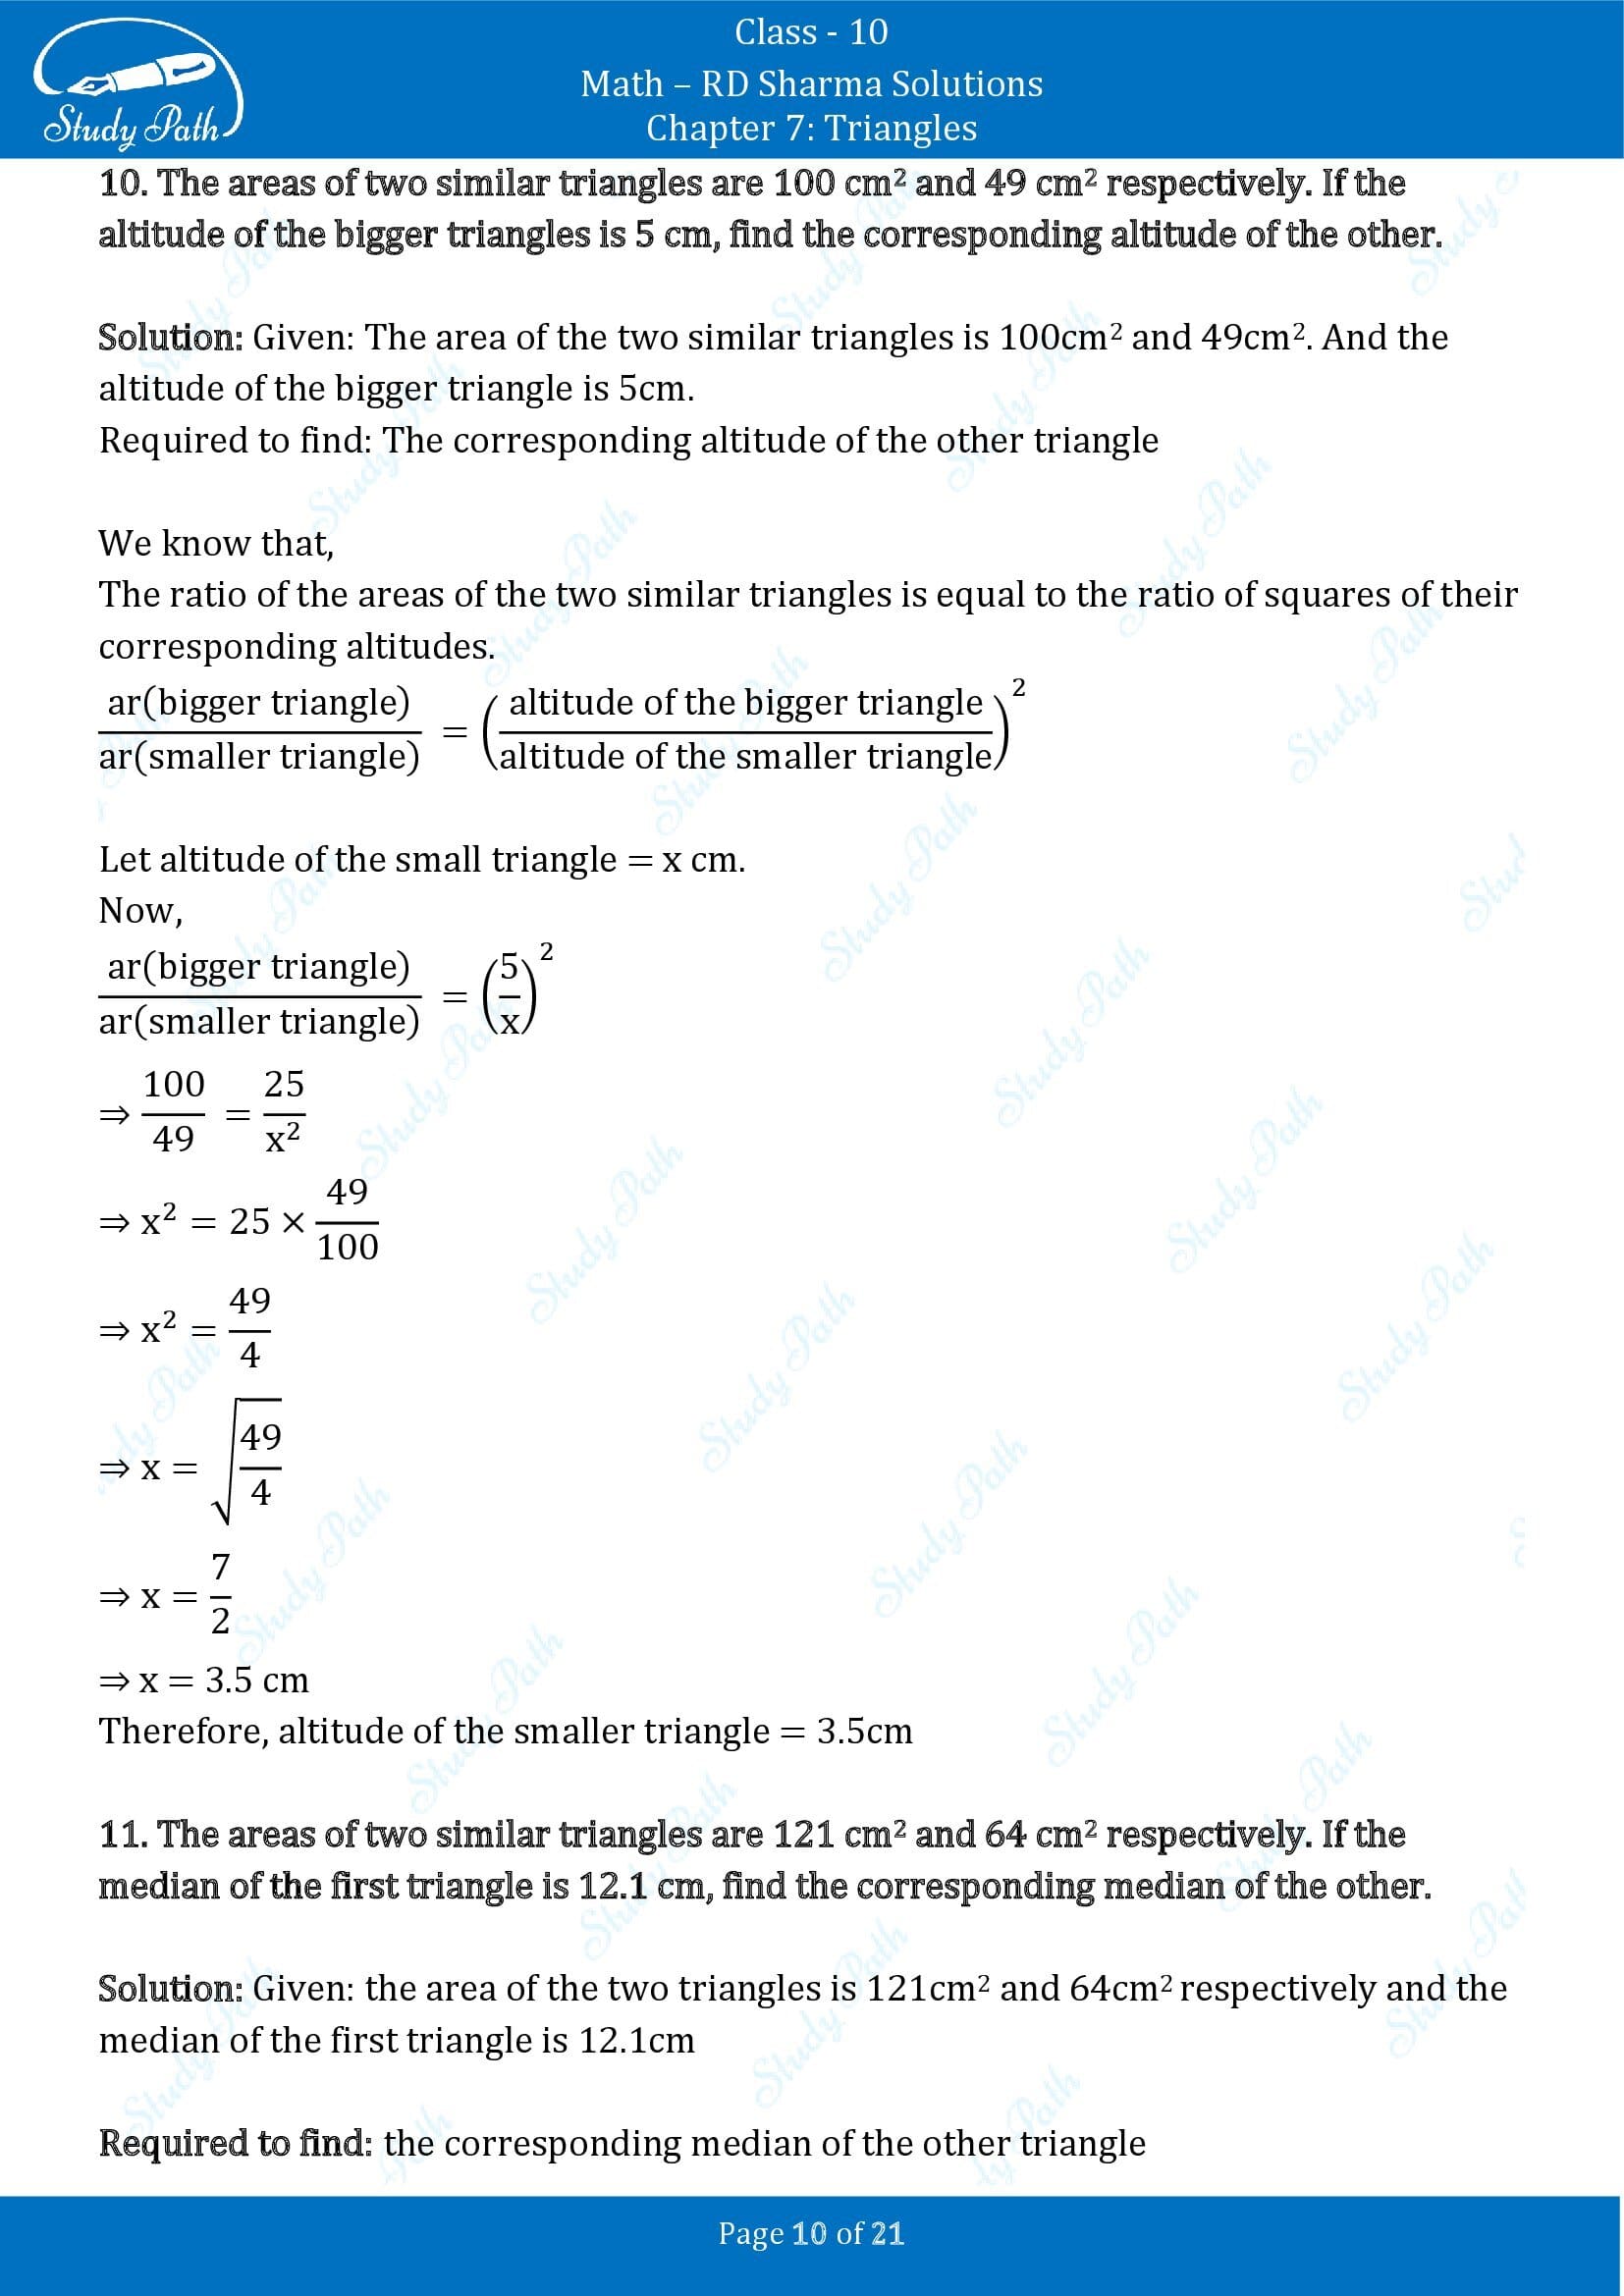 RD Sharma Solutions Class 10 Chapter 7 Triangles Exercise 7.6 00010